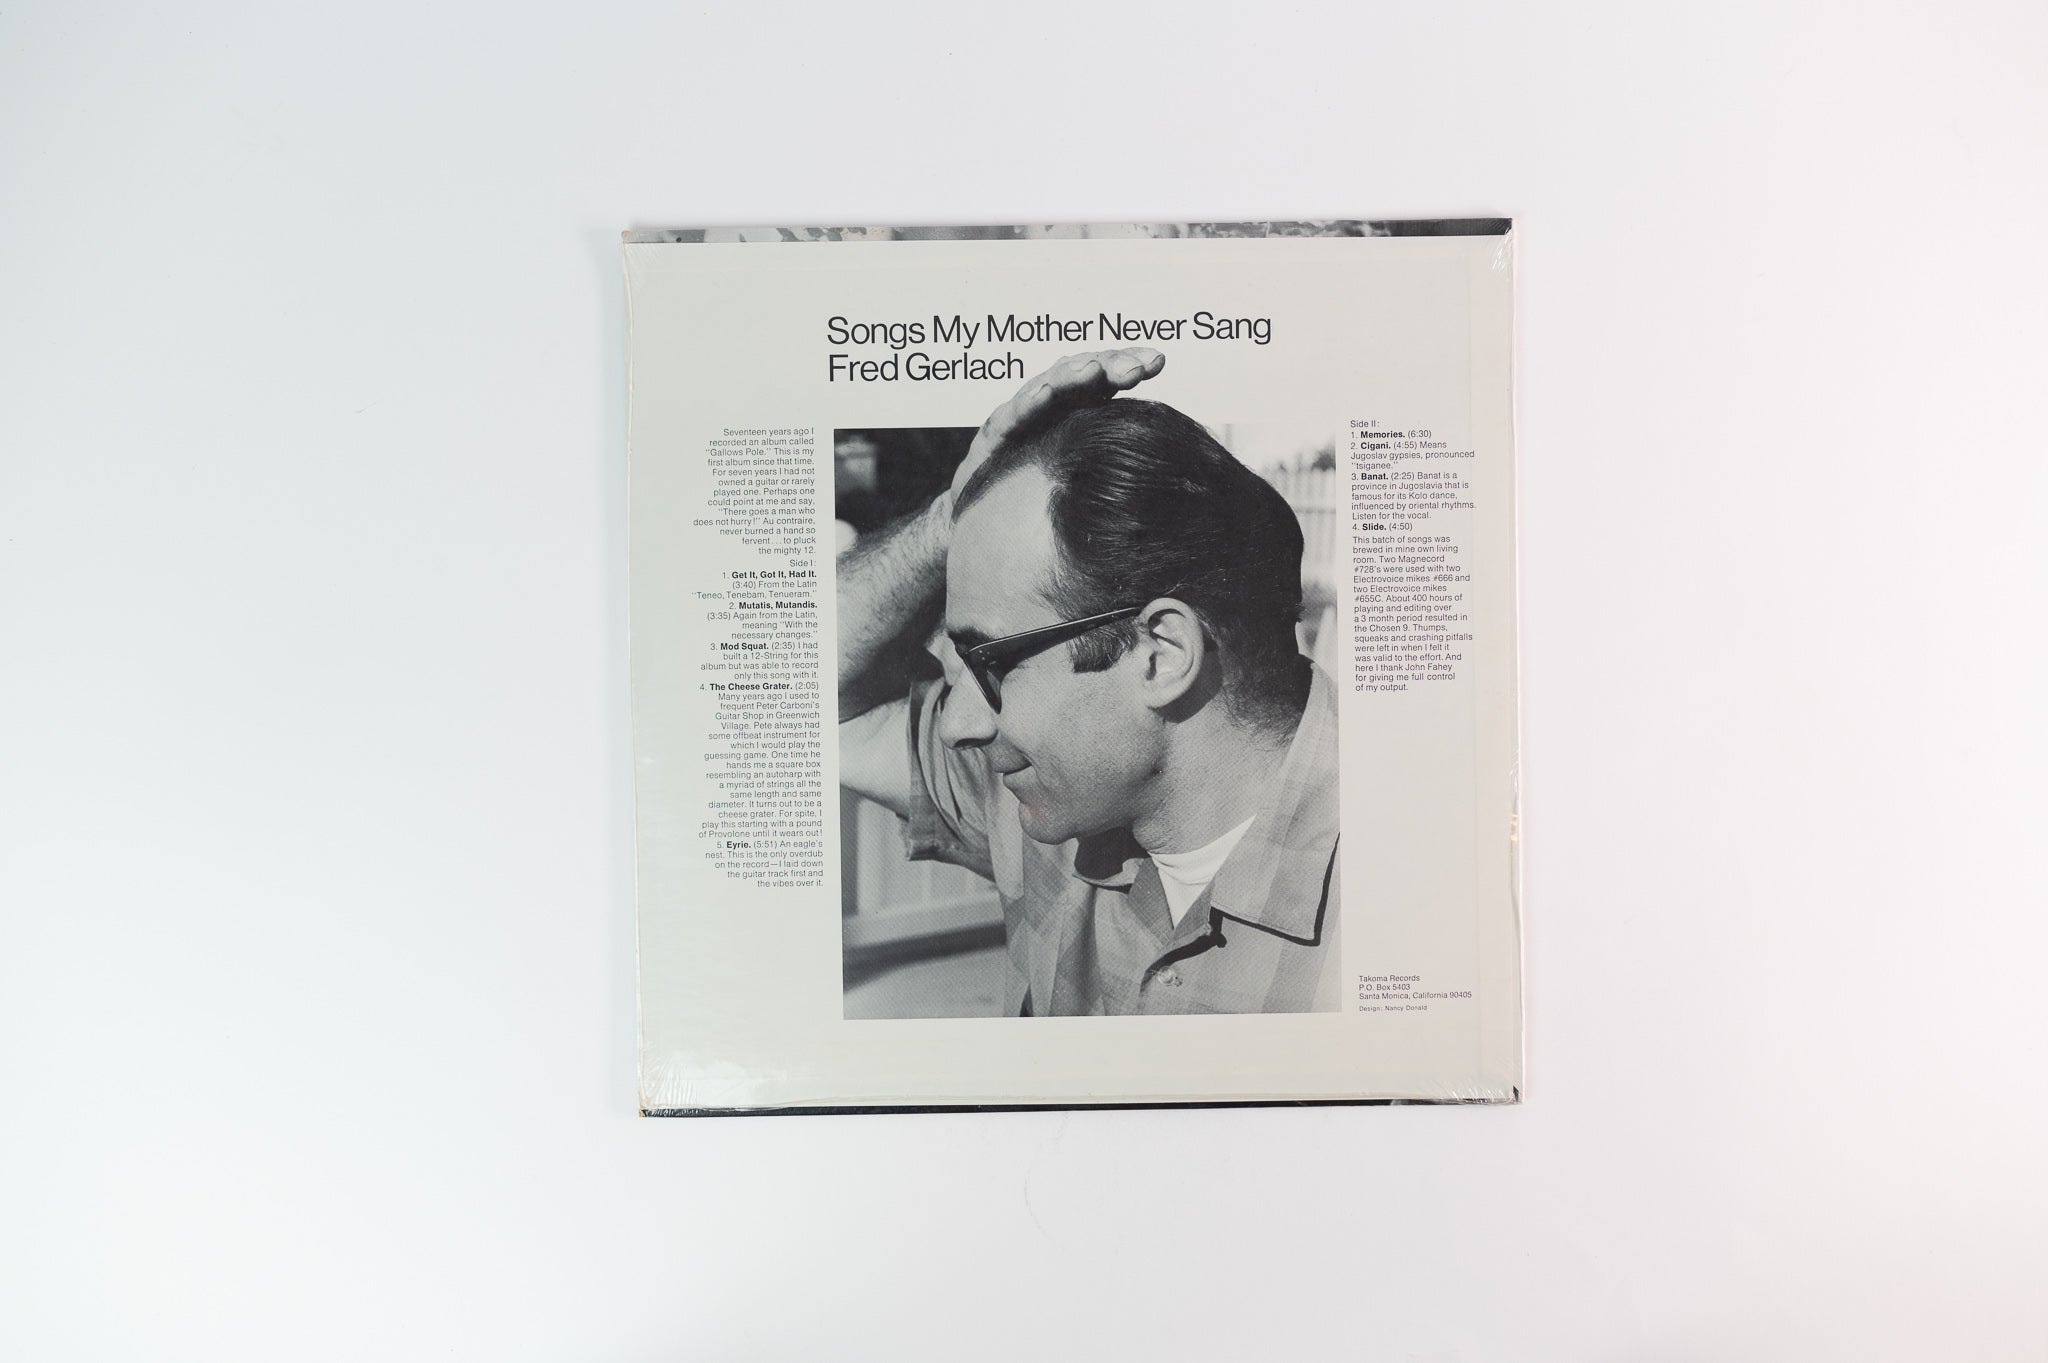 Fred Gerlach - Songs My Mother Never Sang on Takoma Sealed